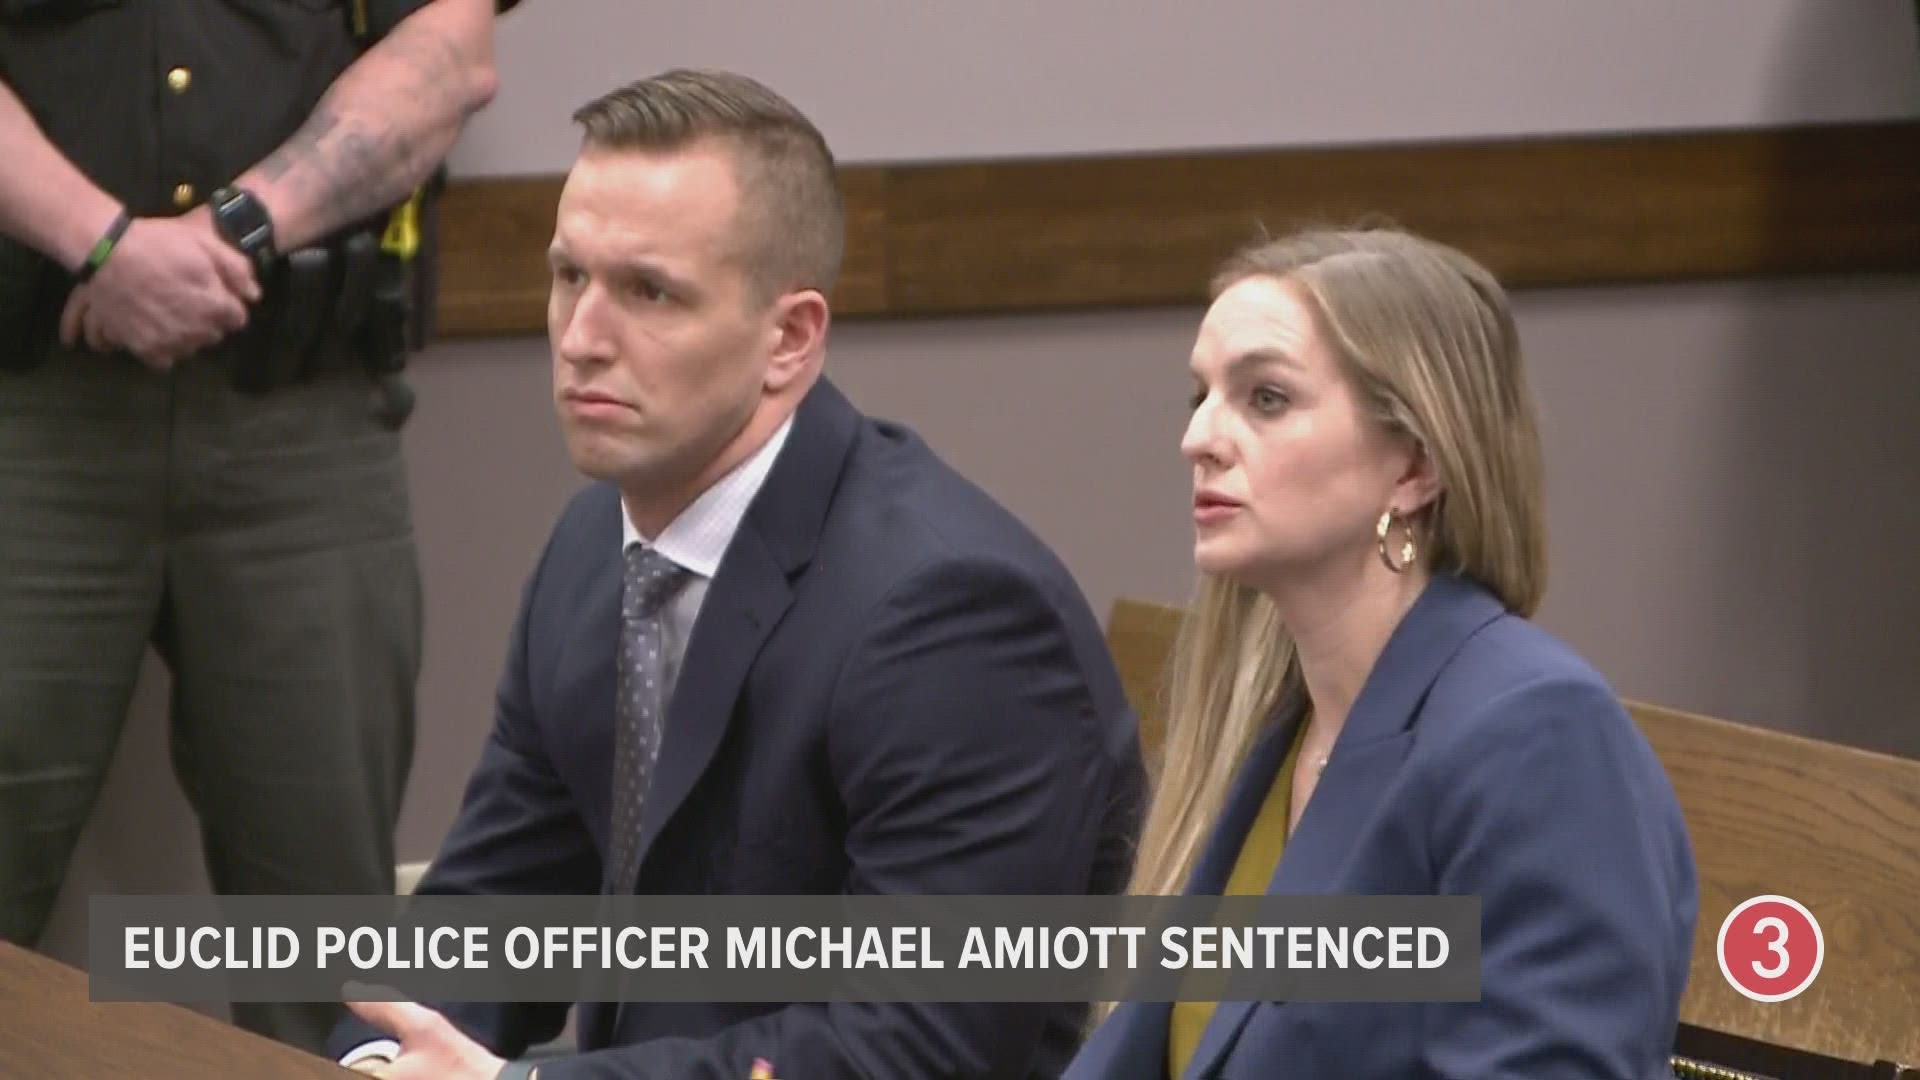 Here is the moment Amiott was sentenced in the case.